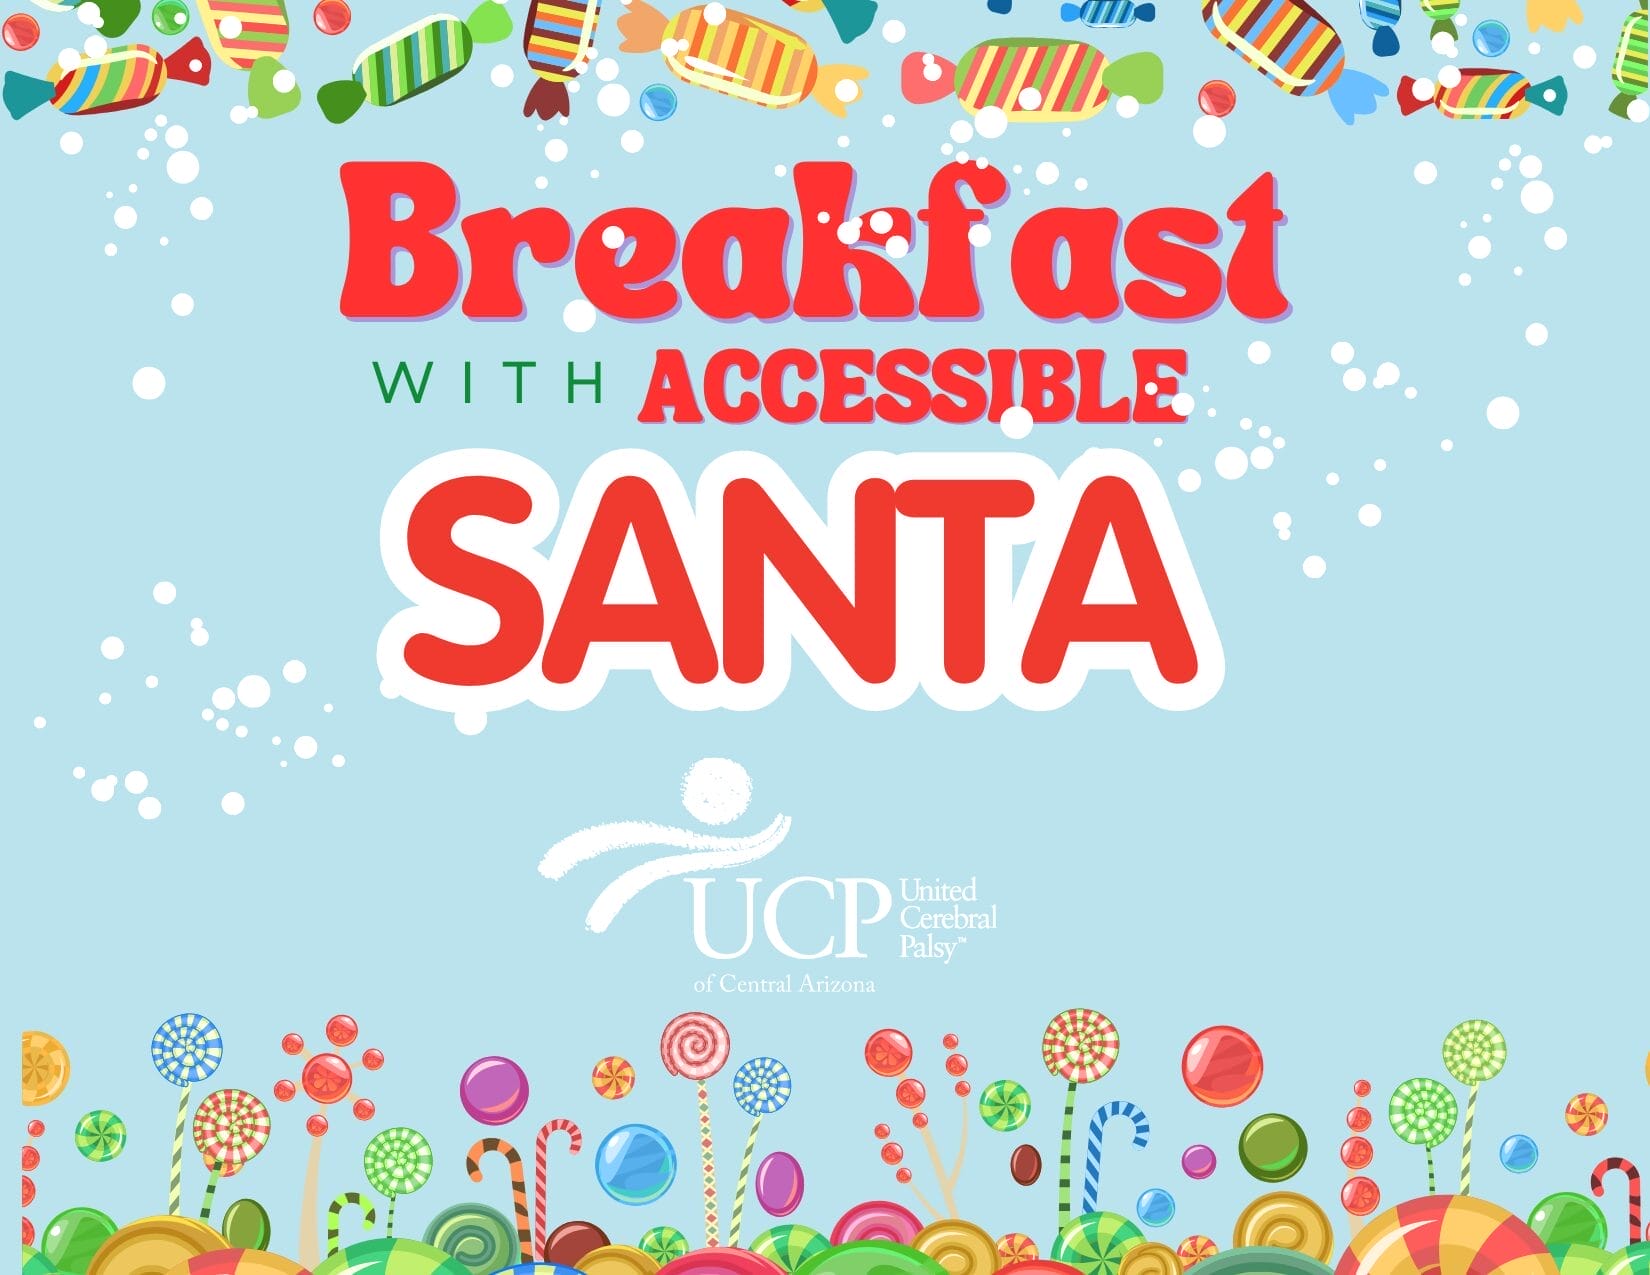 Join us for a special breakfast event with accessible santa. This is a unique opportunity to enjoy a delicious morning meal while meeting and interacting with Santa, who has been specially trained to make the experience accessible for